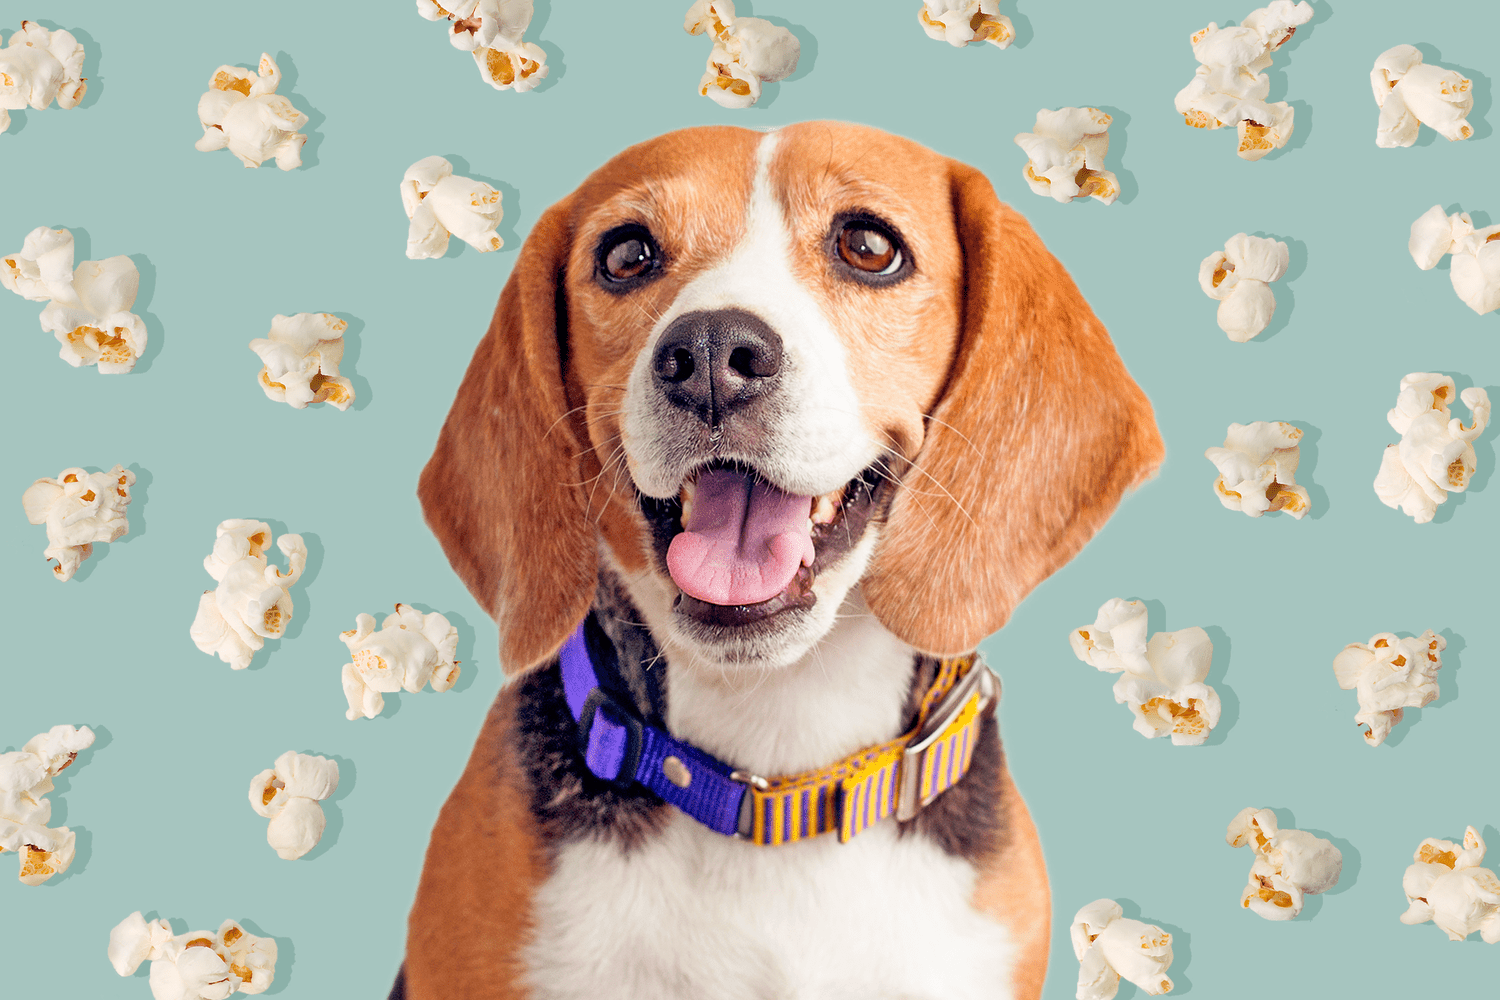 Can Dogs Eat Popcorn? Only If It's Plain